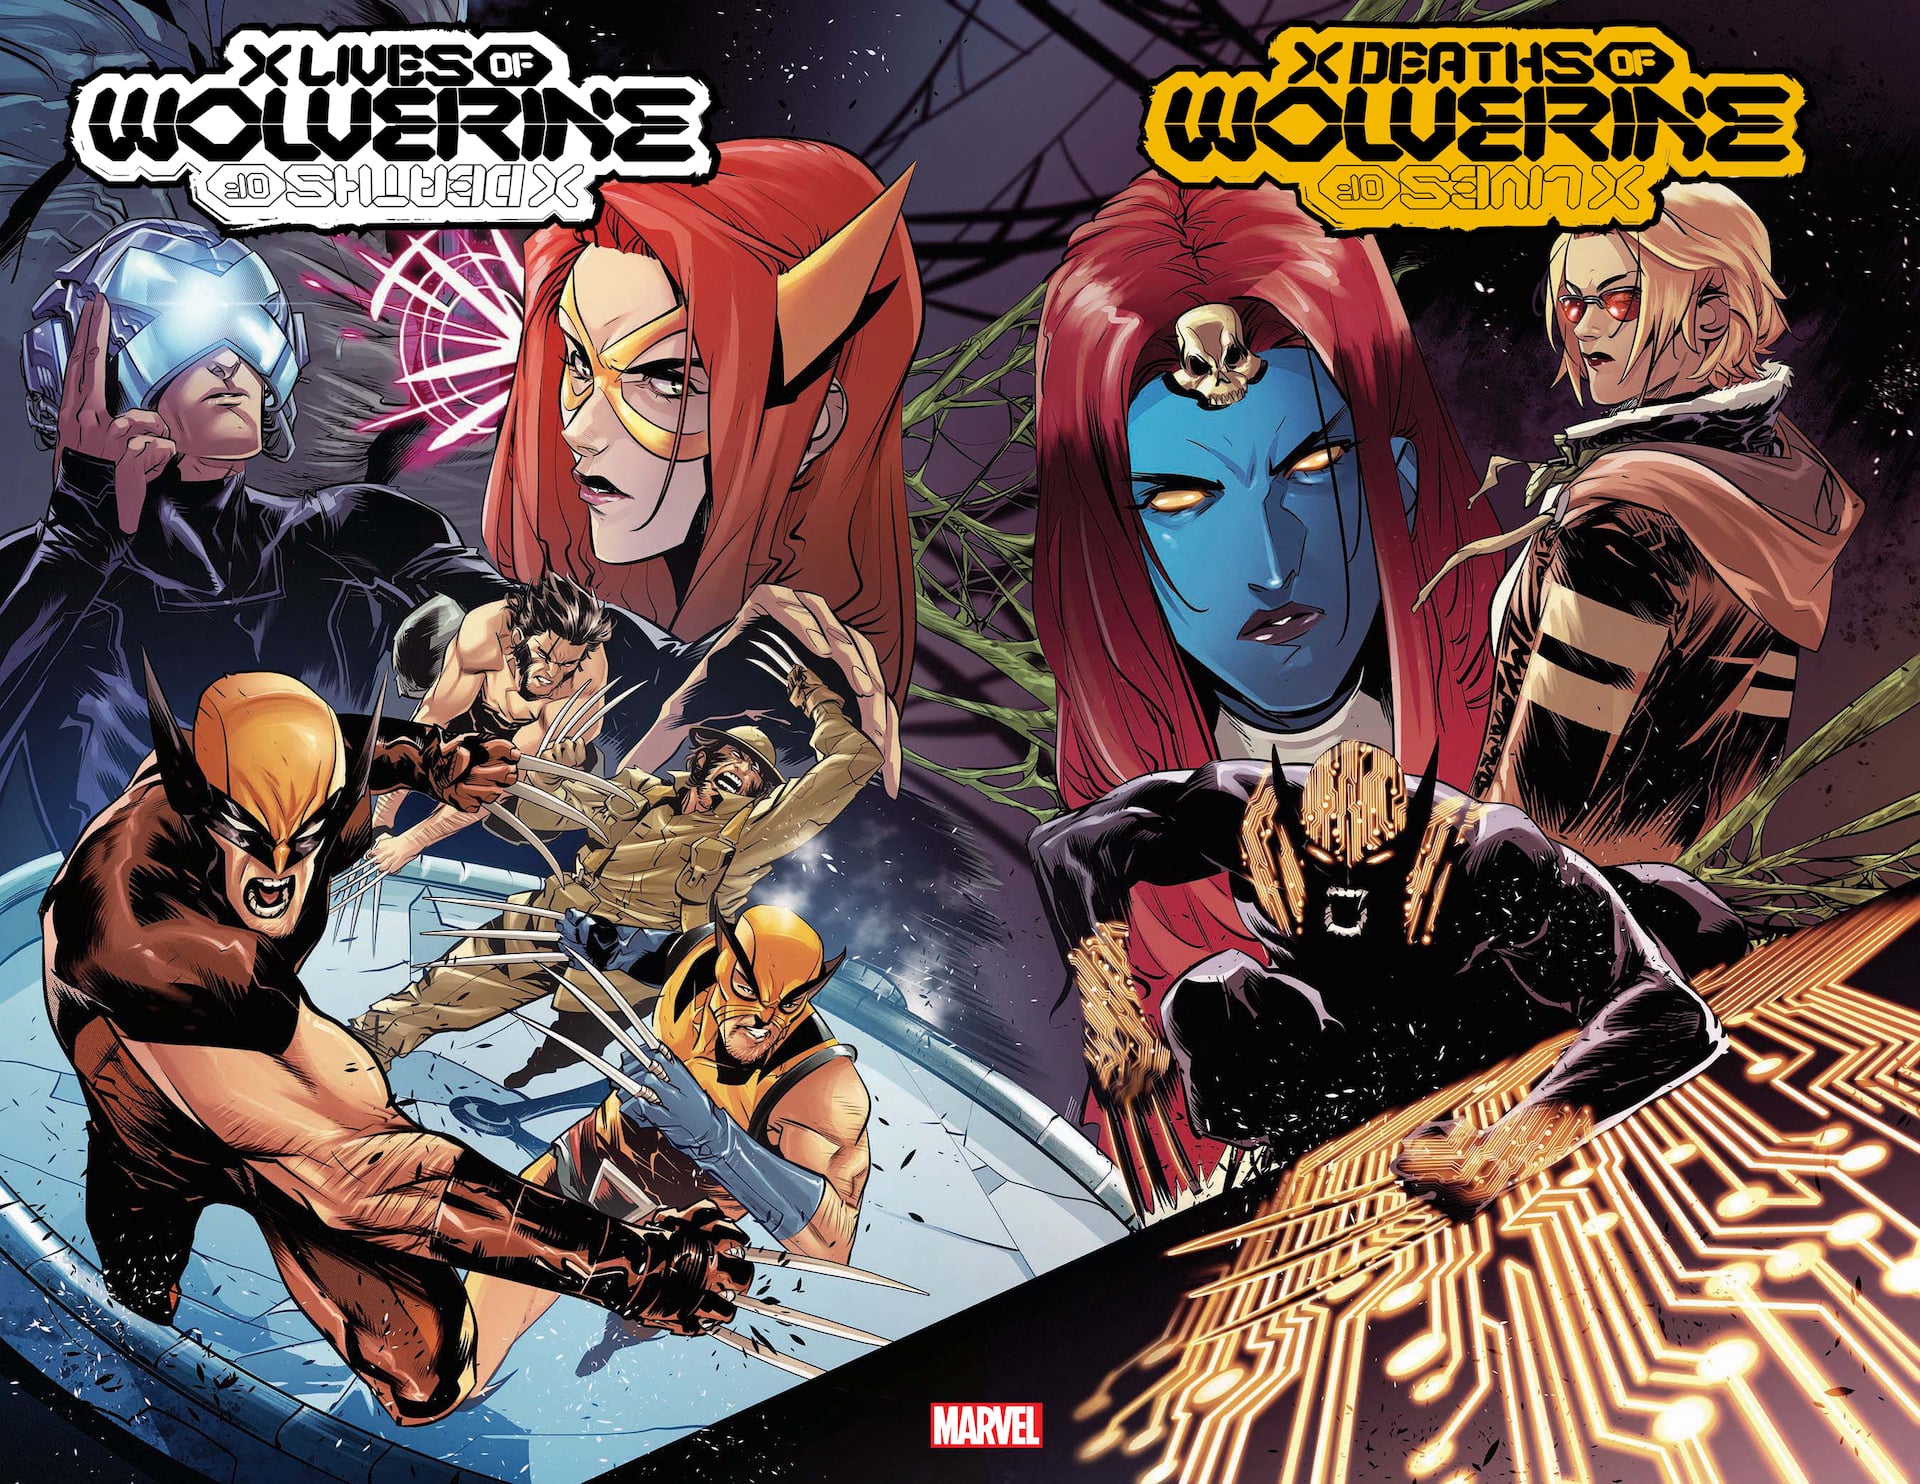 Marvel sells out of multiple titles from X-Men, Spider-Man, and Star Wars, and more